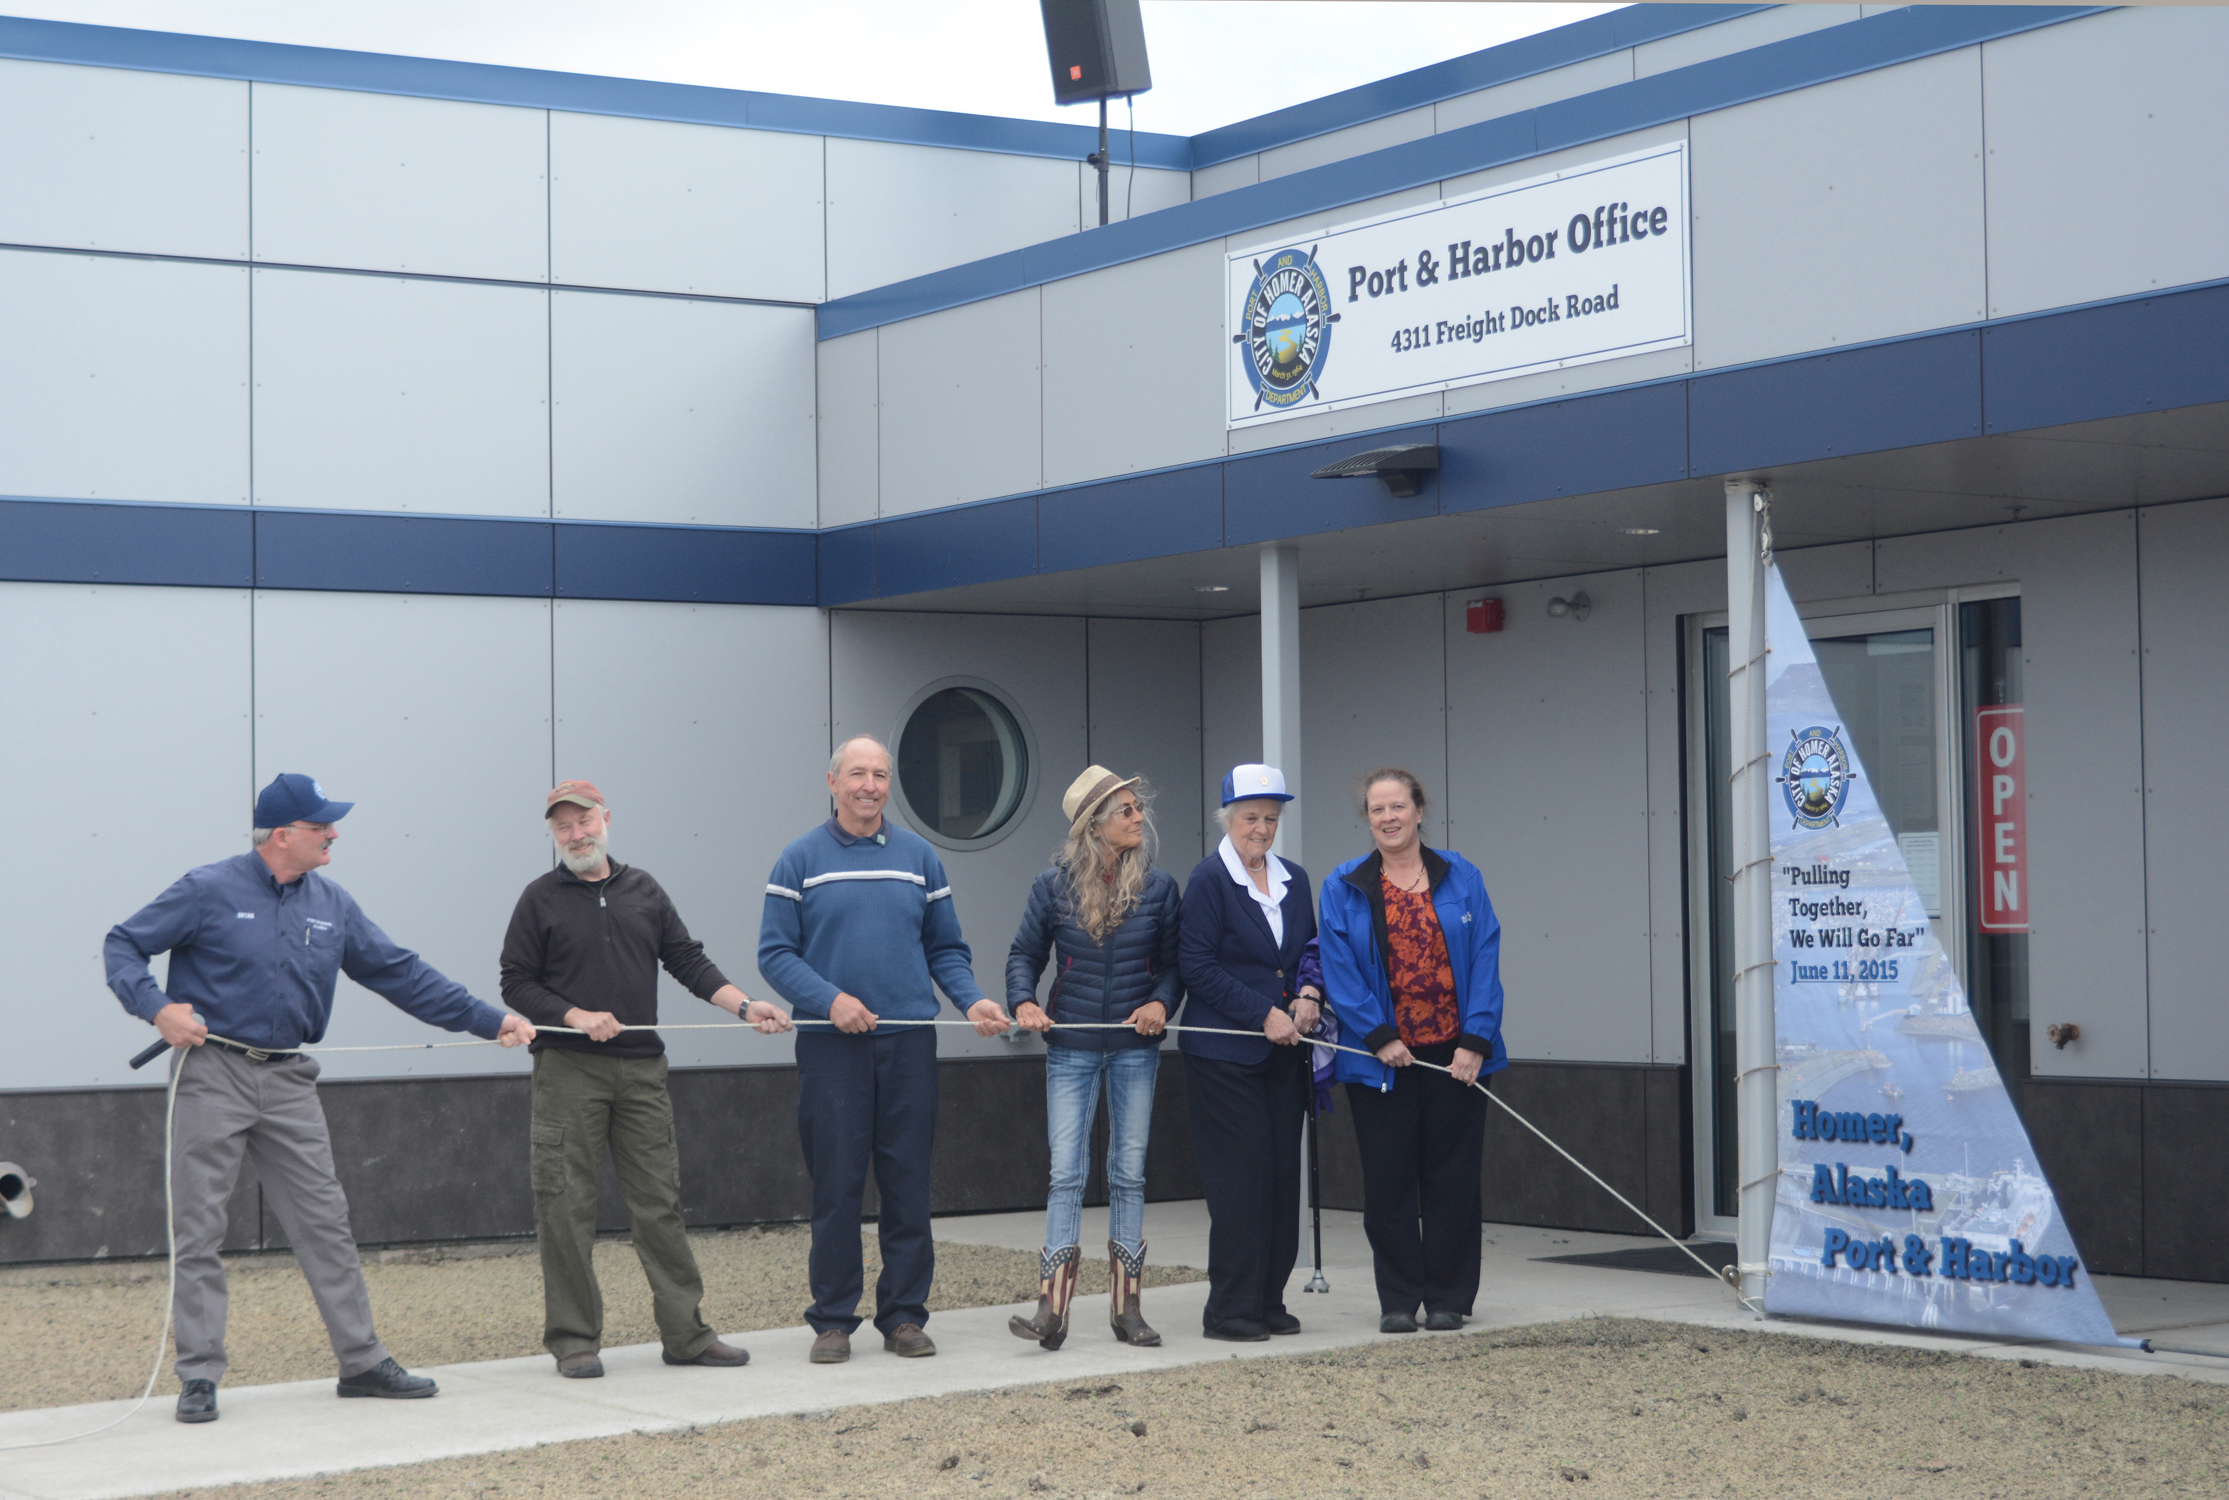 Harbormaster Bryan Hawkins, left, holds down the line after a sail was raised at the ceremonial opening of the new Harbor Office last Thursday. Helping him from left to right are Port and Harbor Commissioner Michael Stockburger, Homer City council member Bryan Zak, Port and Harbor Commissioner Catherine Ulmer, former council member Barbara Howard and Homer Mayor Beth Wythe. Hawkins said he chose raising a sail instead of a ribbon cutting in keeping with the harbor theme.-Photo by Michael Armstrong, Homer News